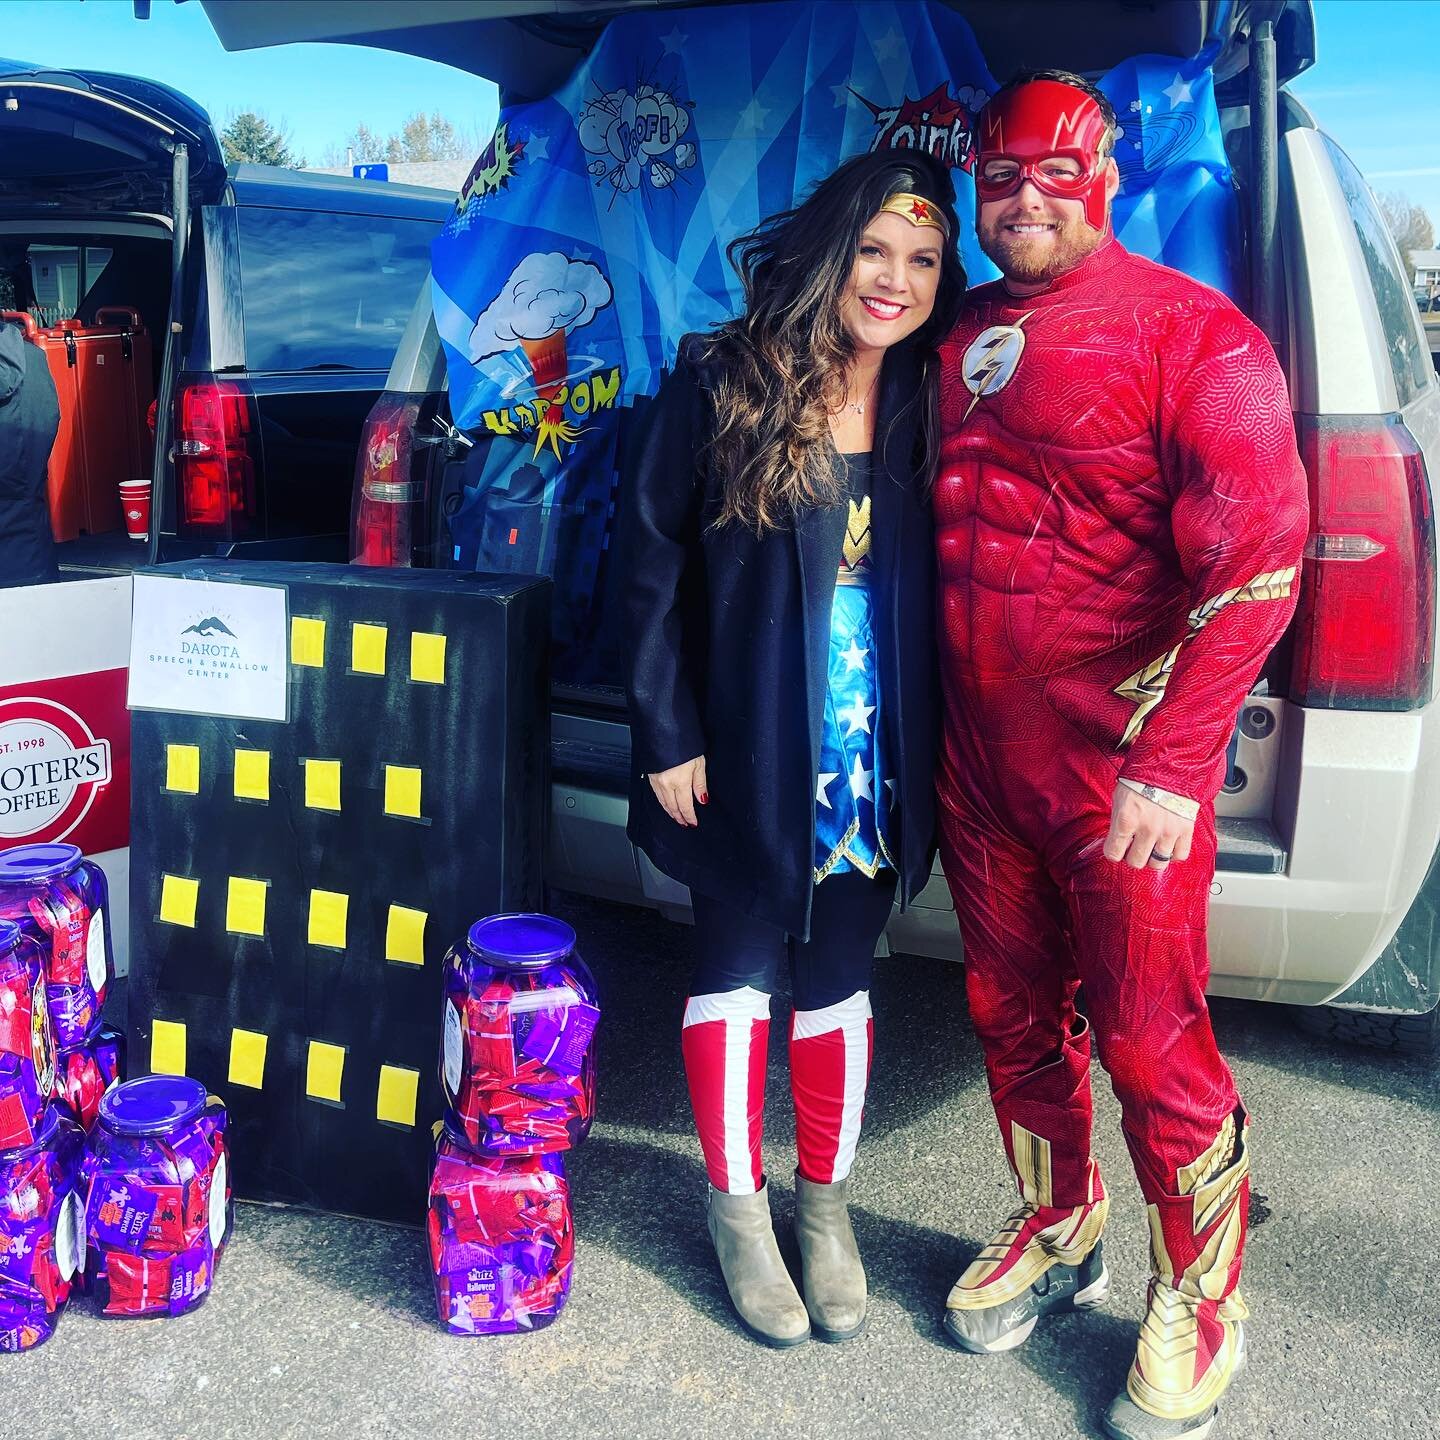 So fun being a part of the annual Rapid Valley trunk-or-treat! 👻 The wind and the cold got in the way of my elaborate trunk plans, but we still passed out 500 bags of cheese balls and I&rsquo;m so glad Flash showed up to help. 🎃#dakotaspeechandswal